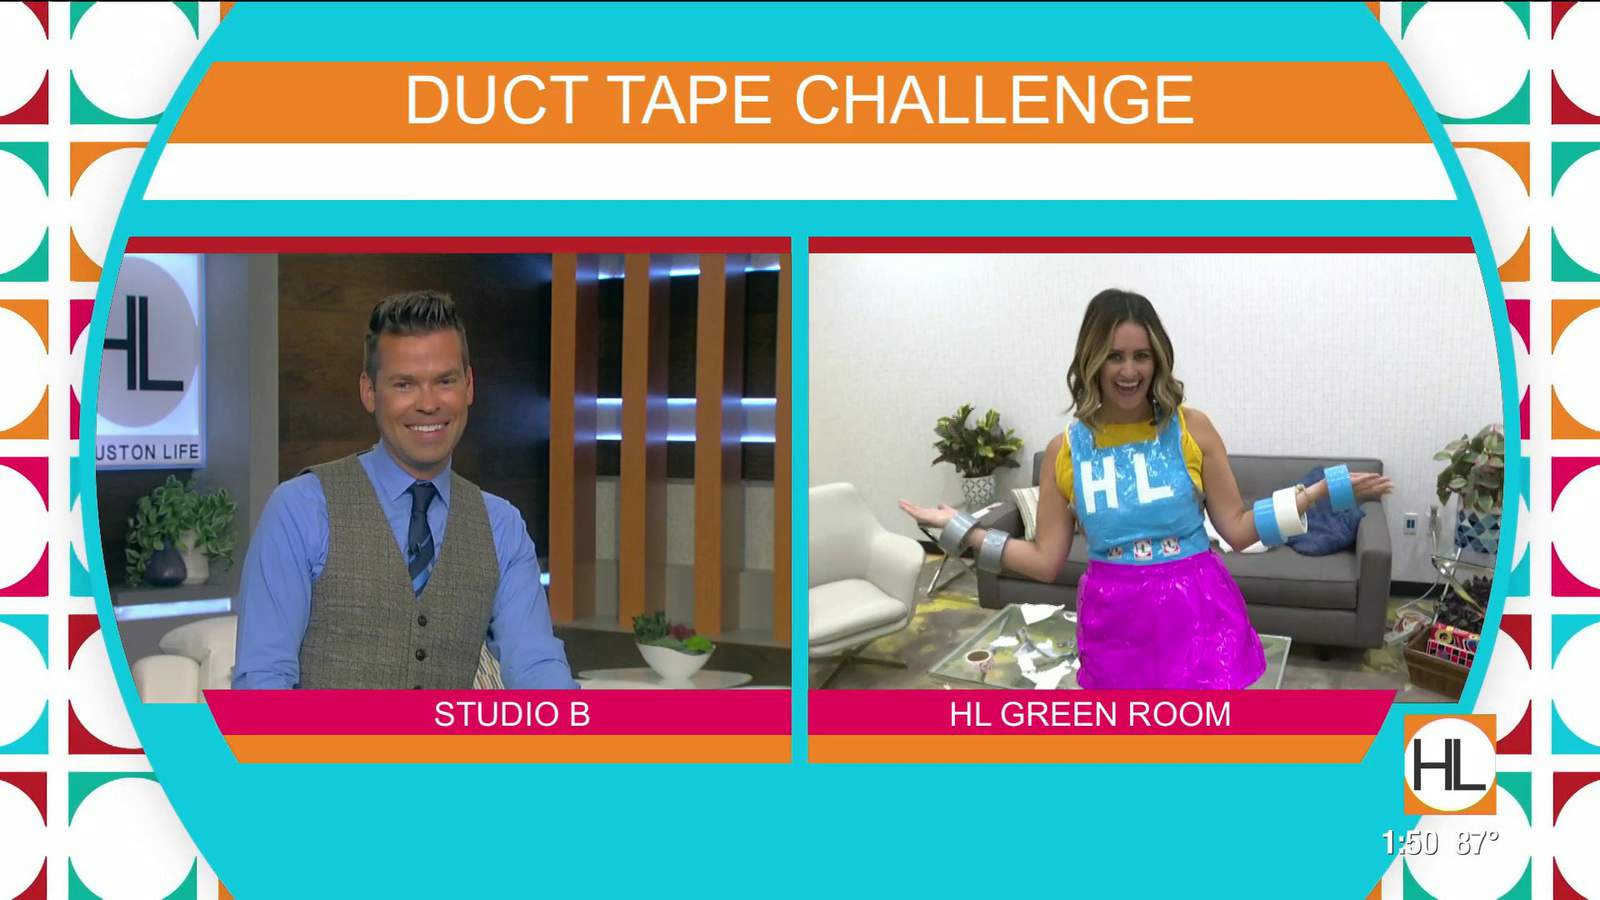 Watch Lauren Kelly try to make a dress out of duct tape